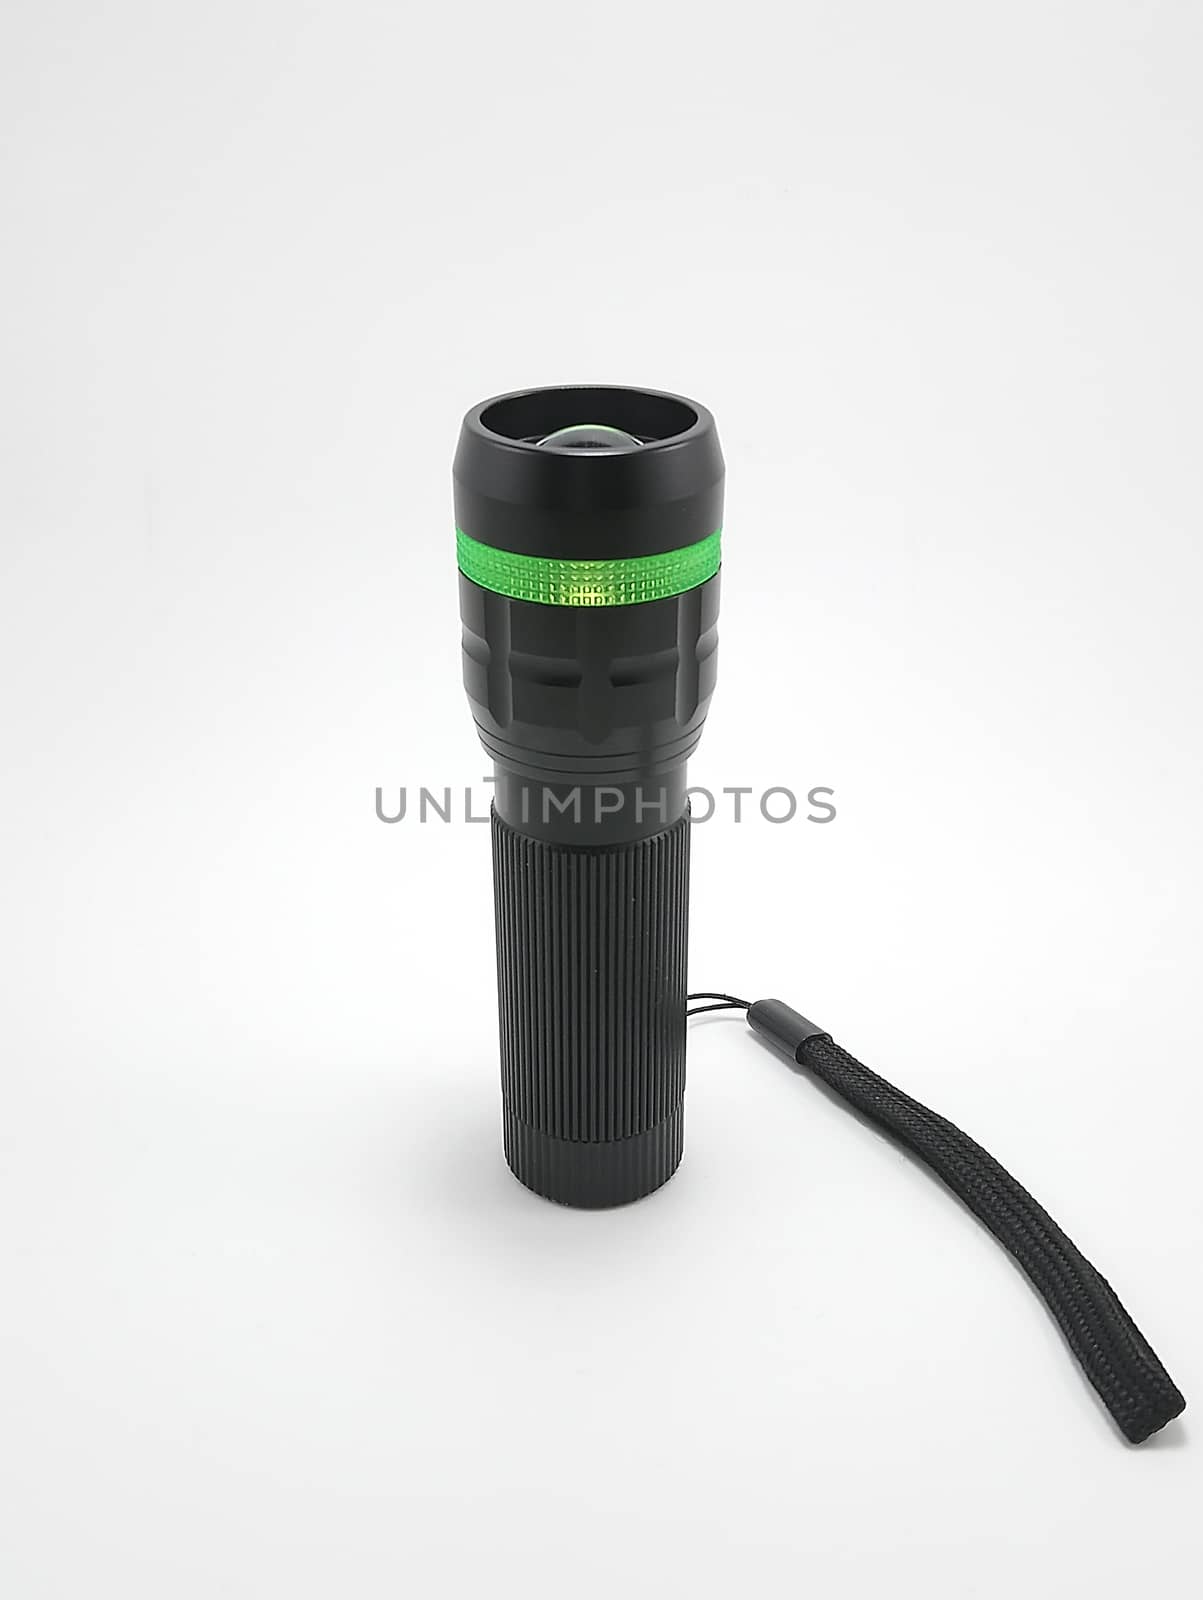 Black portable light emitting diode battery operated flashlight with hand strap